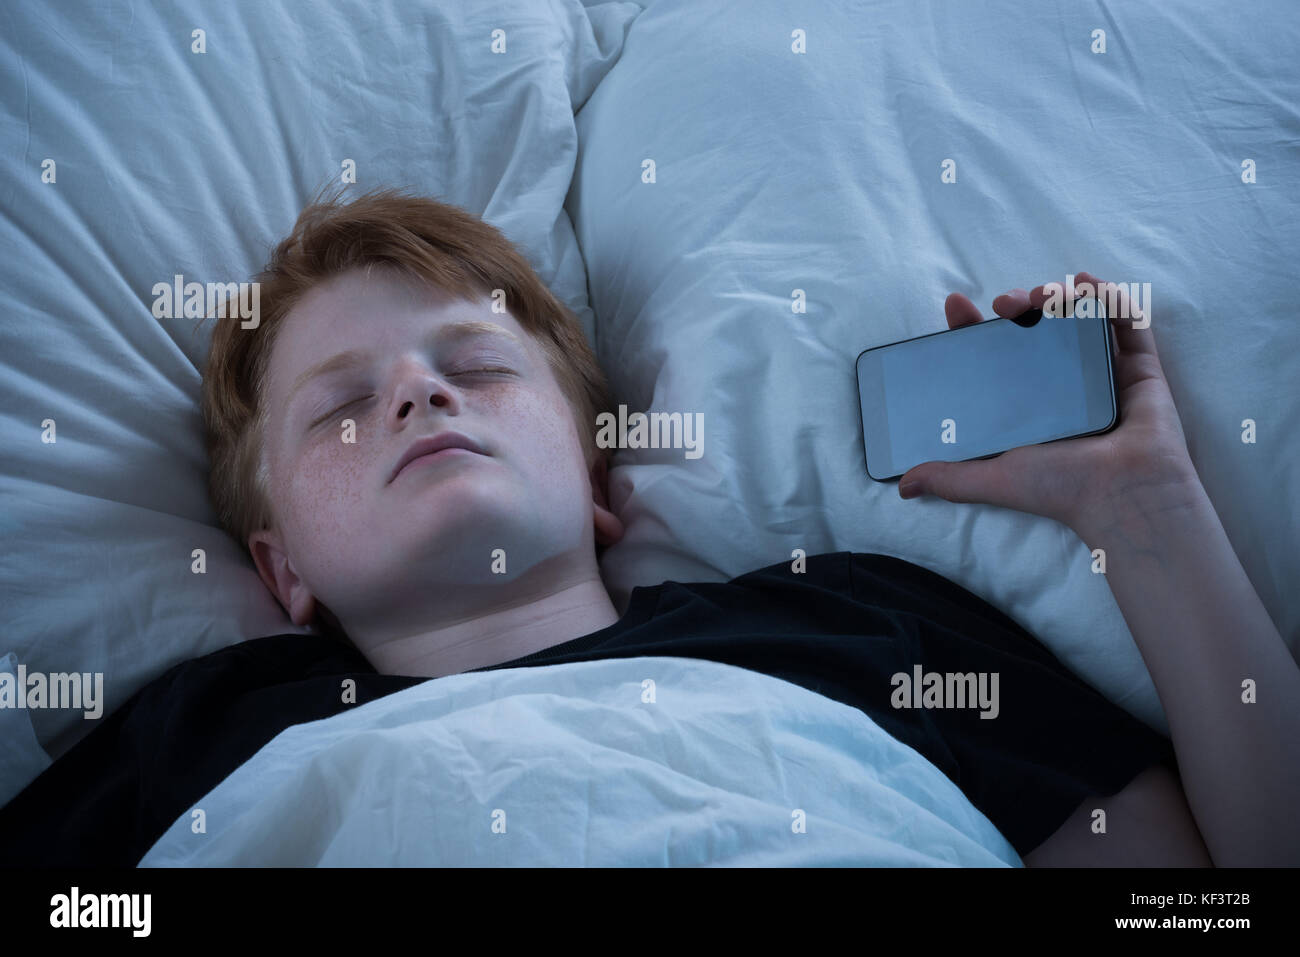 Boy Sleeping On Bed With His Mobile Phone Stock Photo